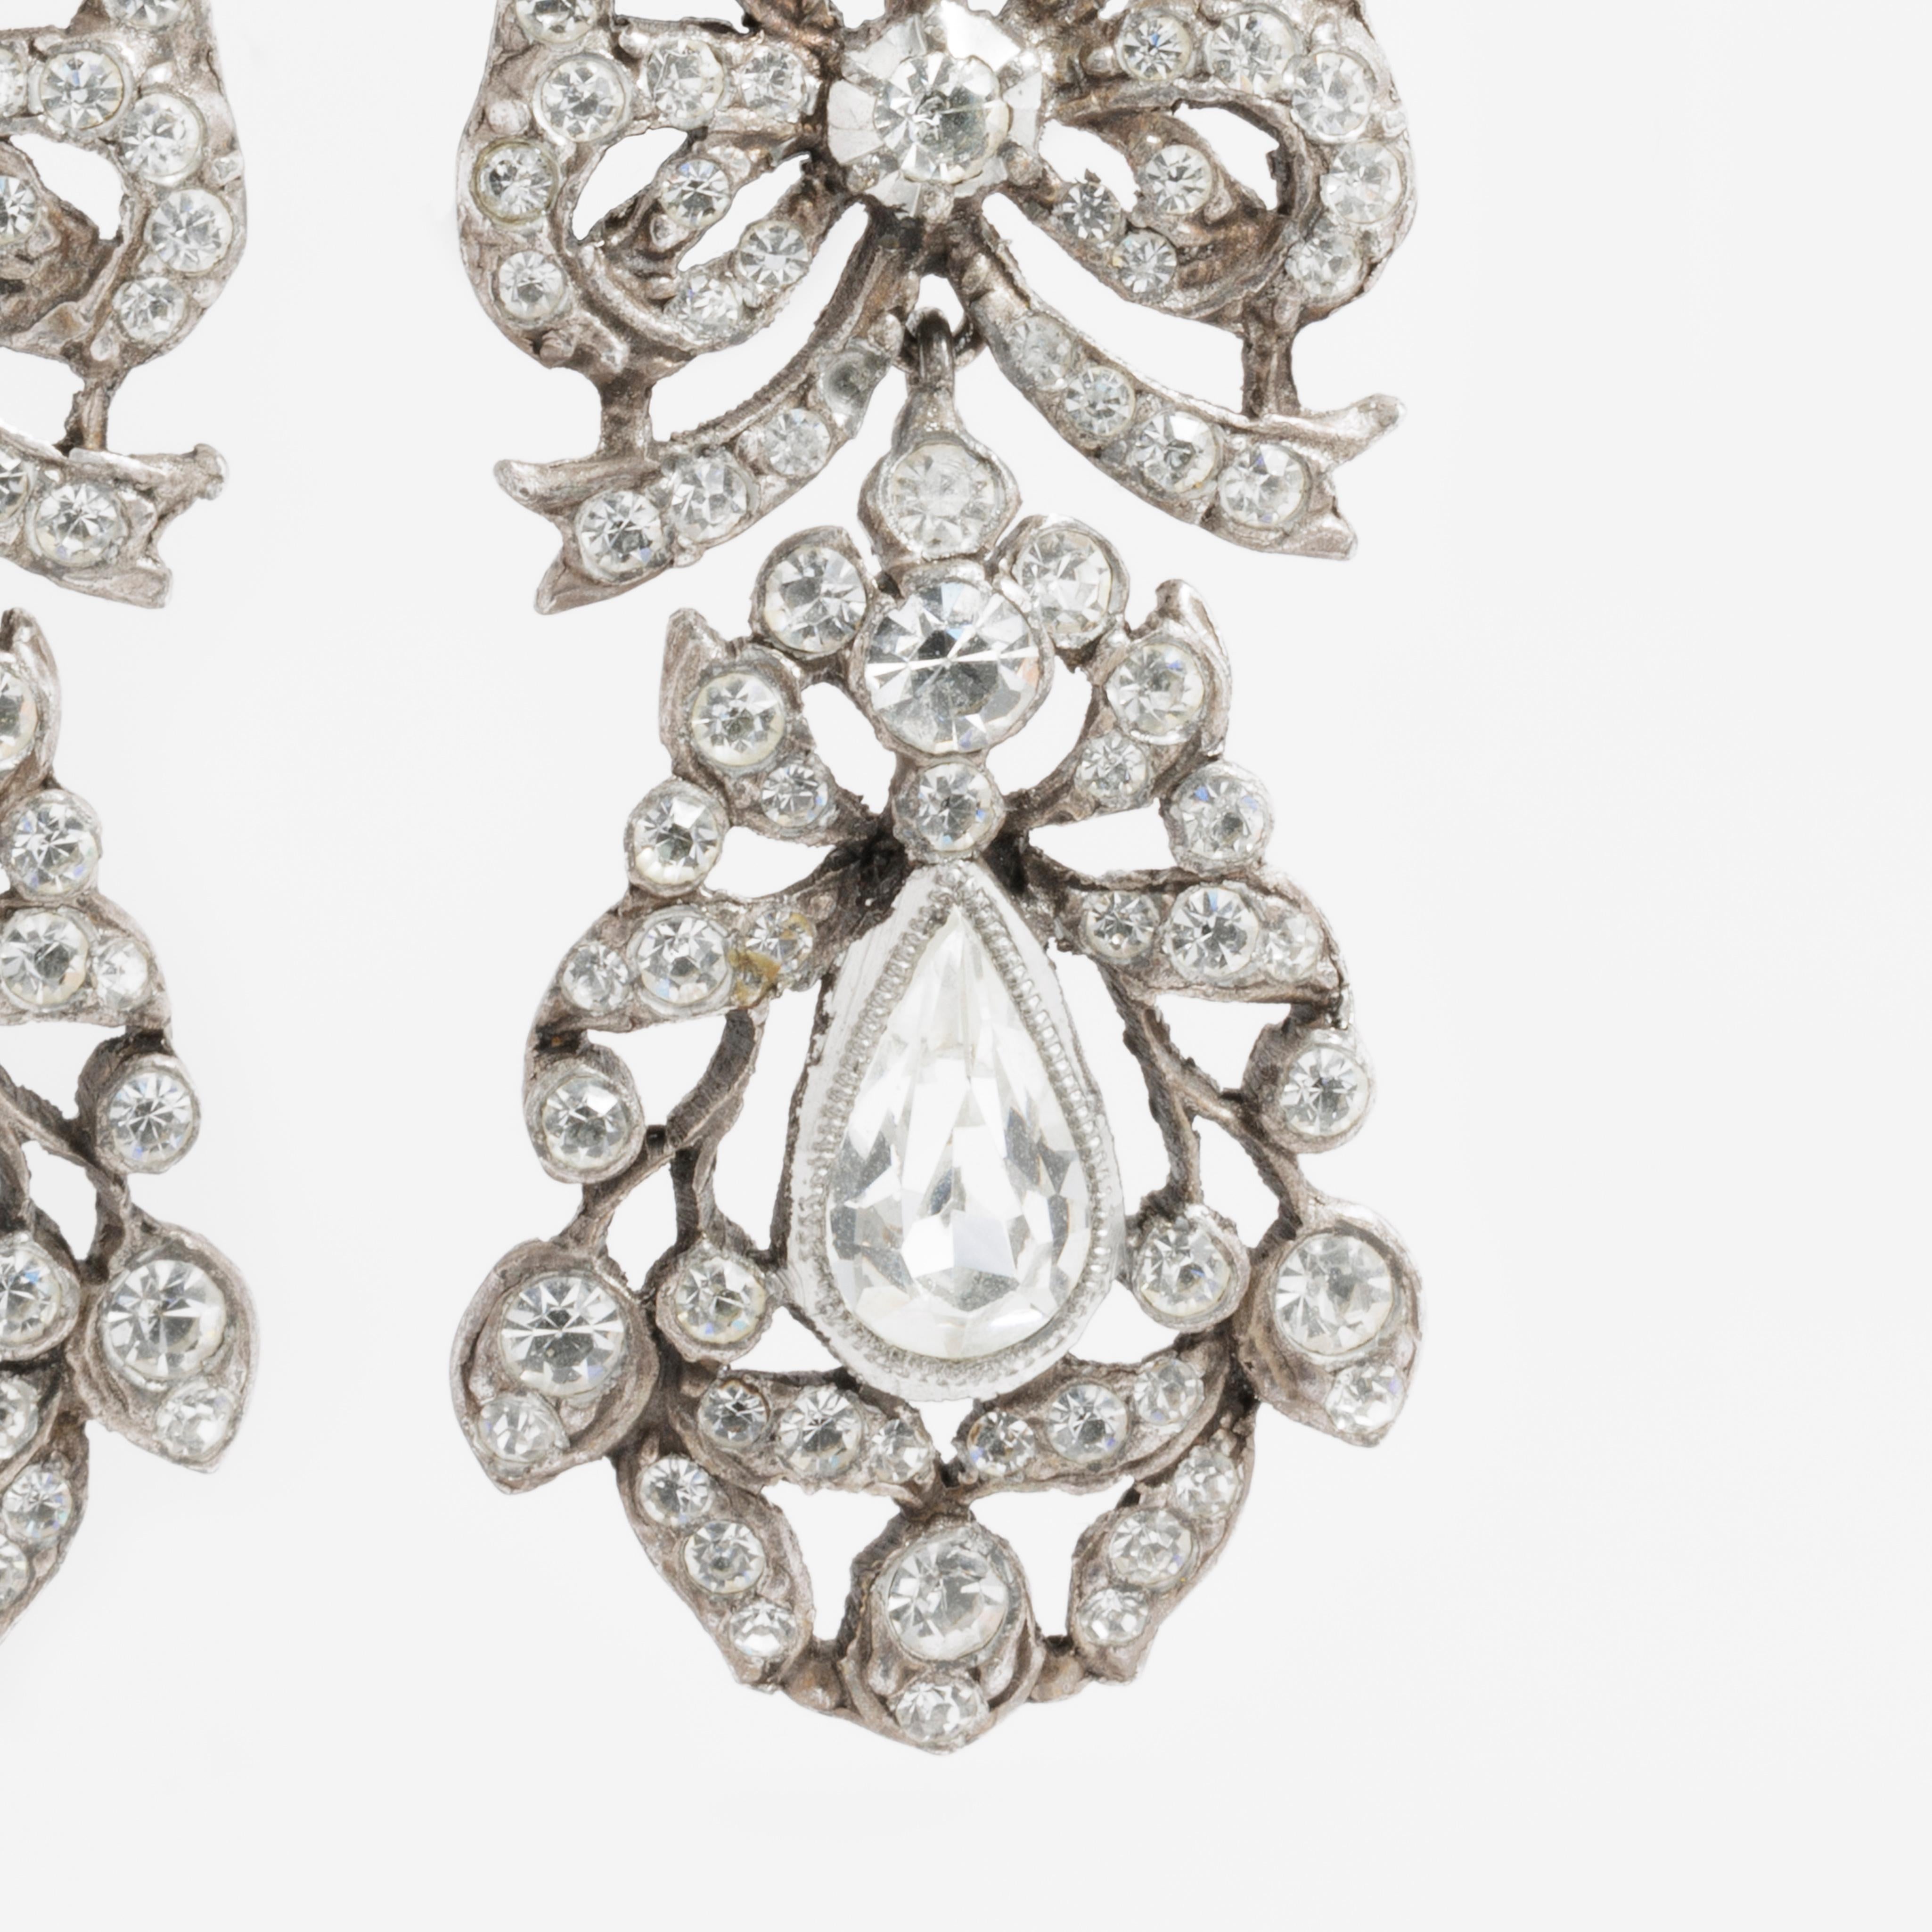 French 19th Century Silver and Clear Paste Pendeloque Chandelier Earrings In Good Condition For Sale In New York, NY